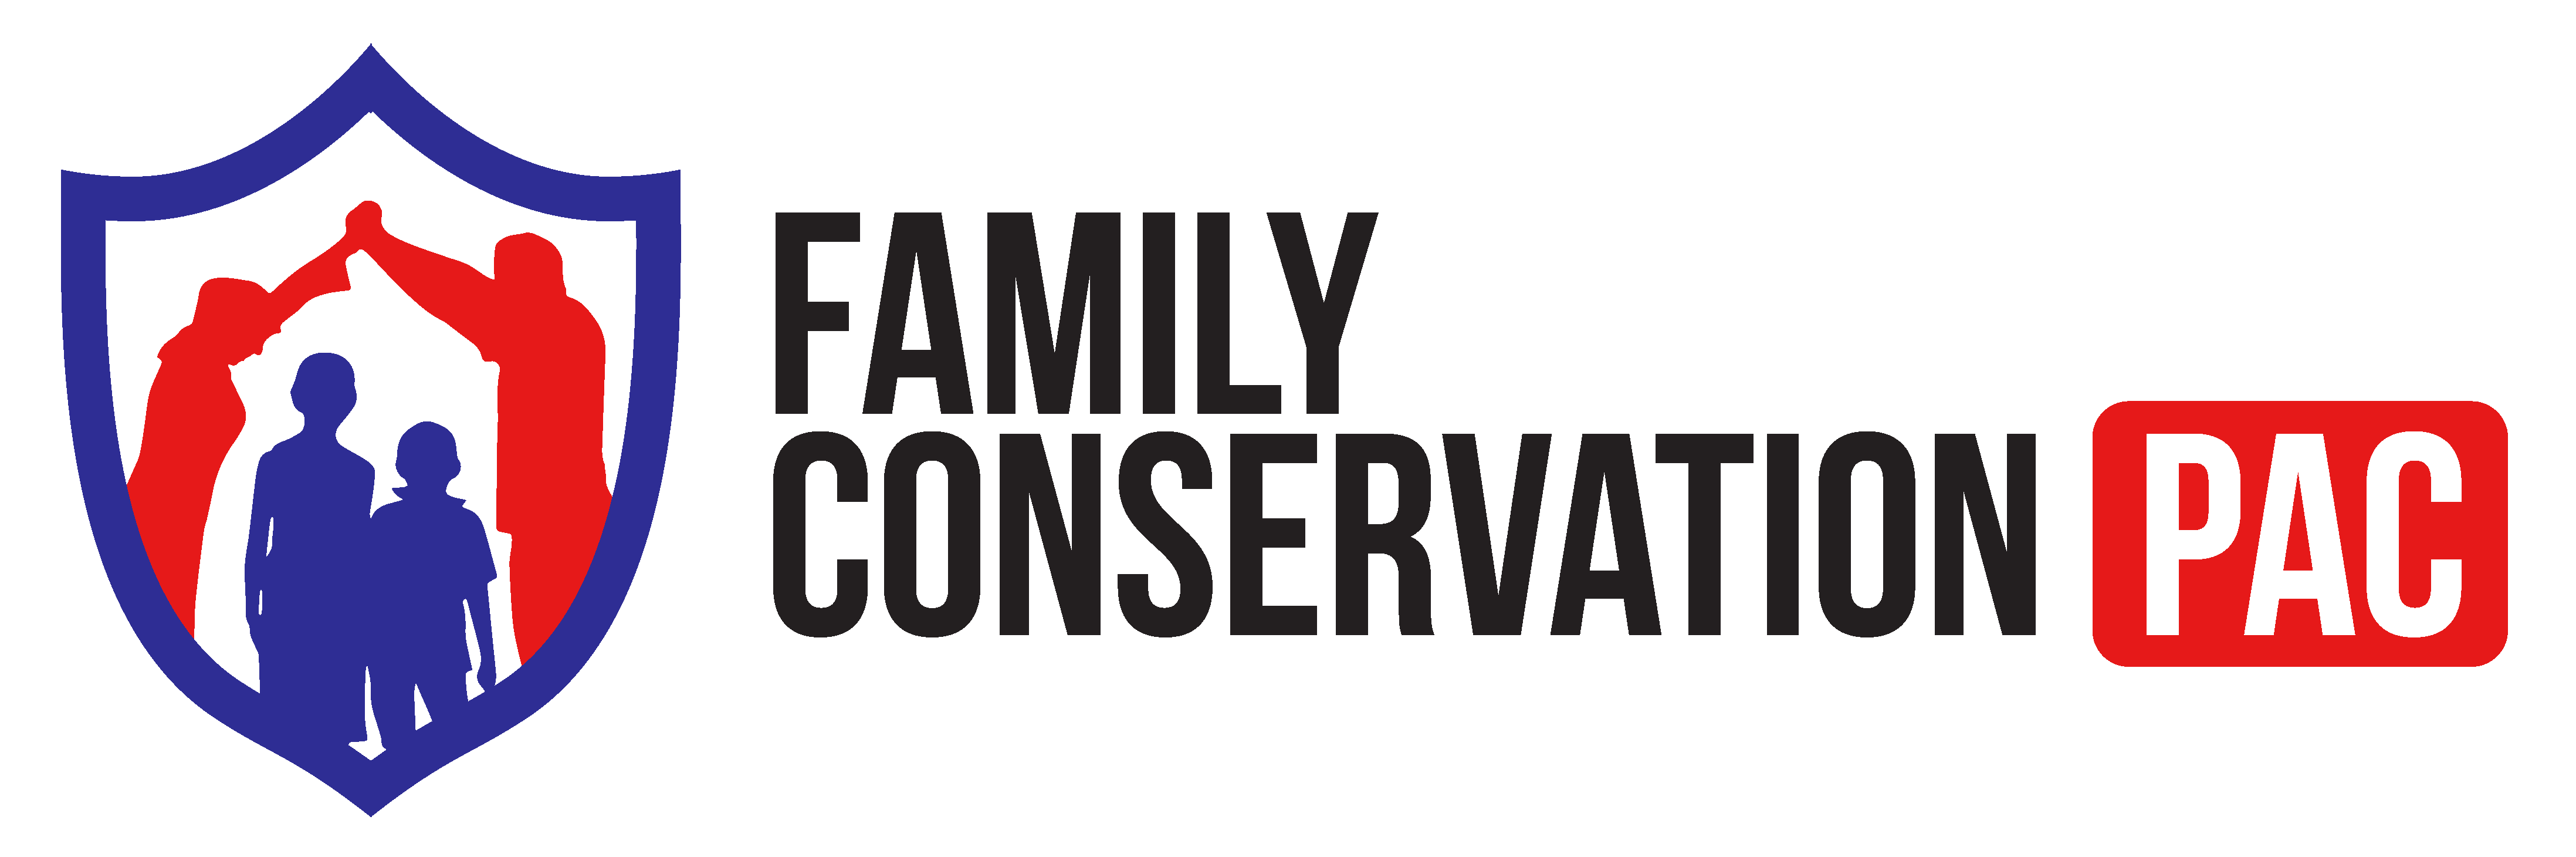 Family Conservation PAC